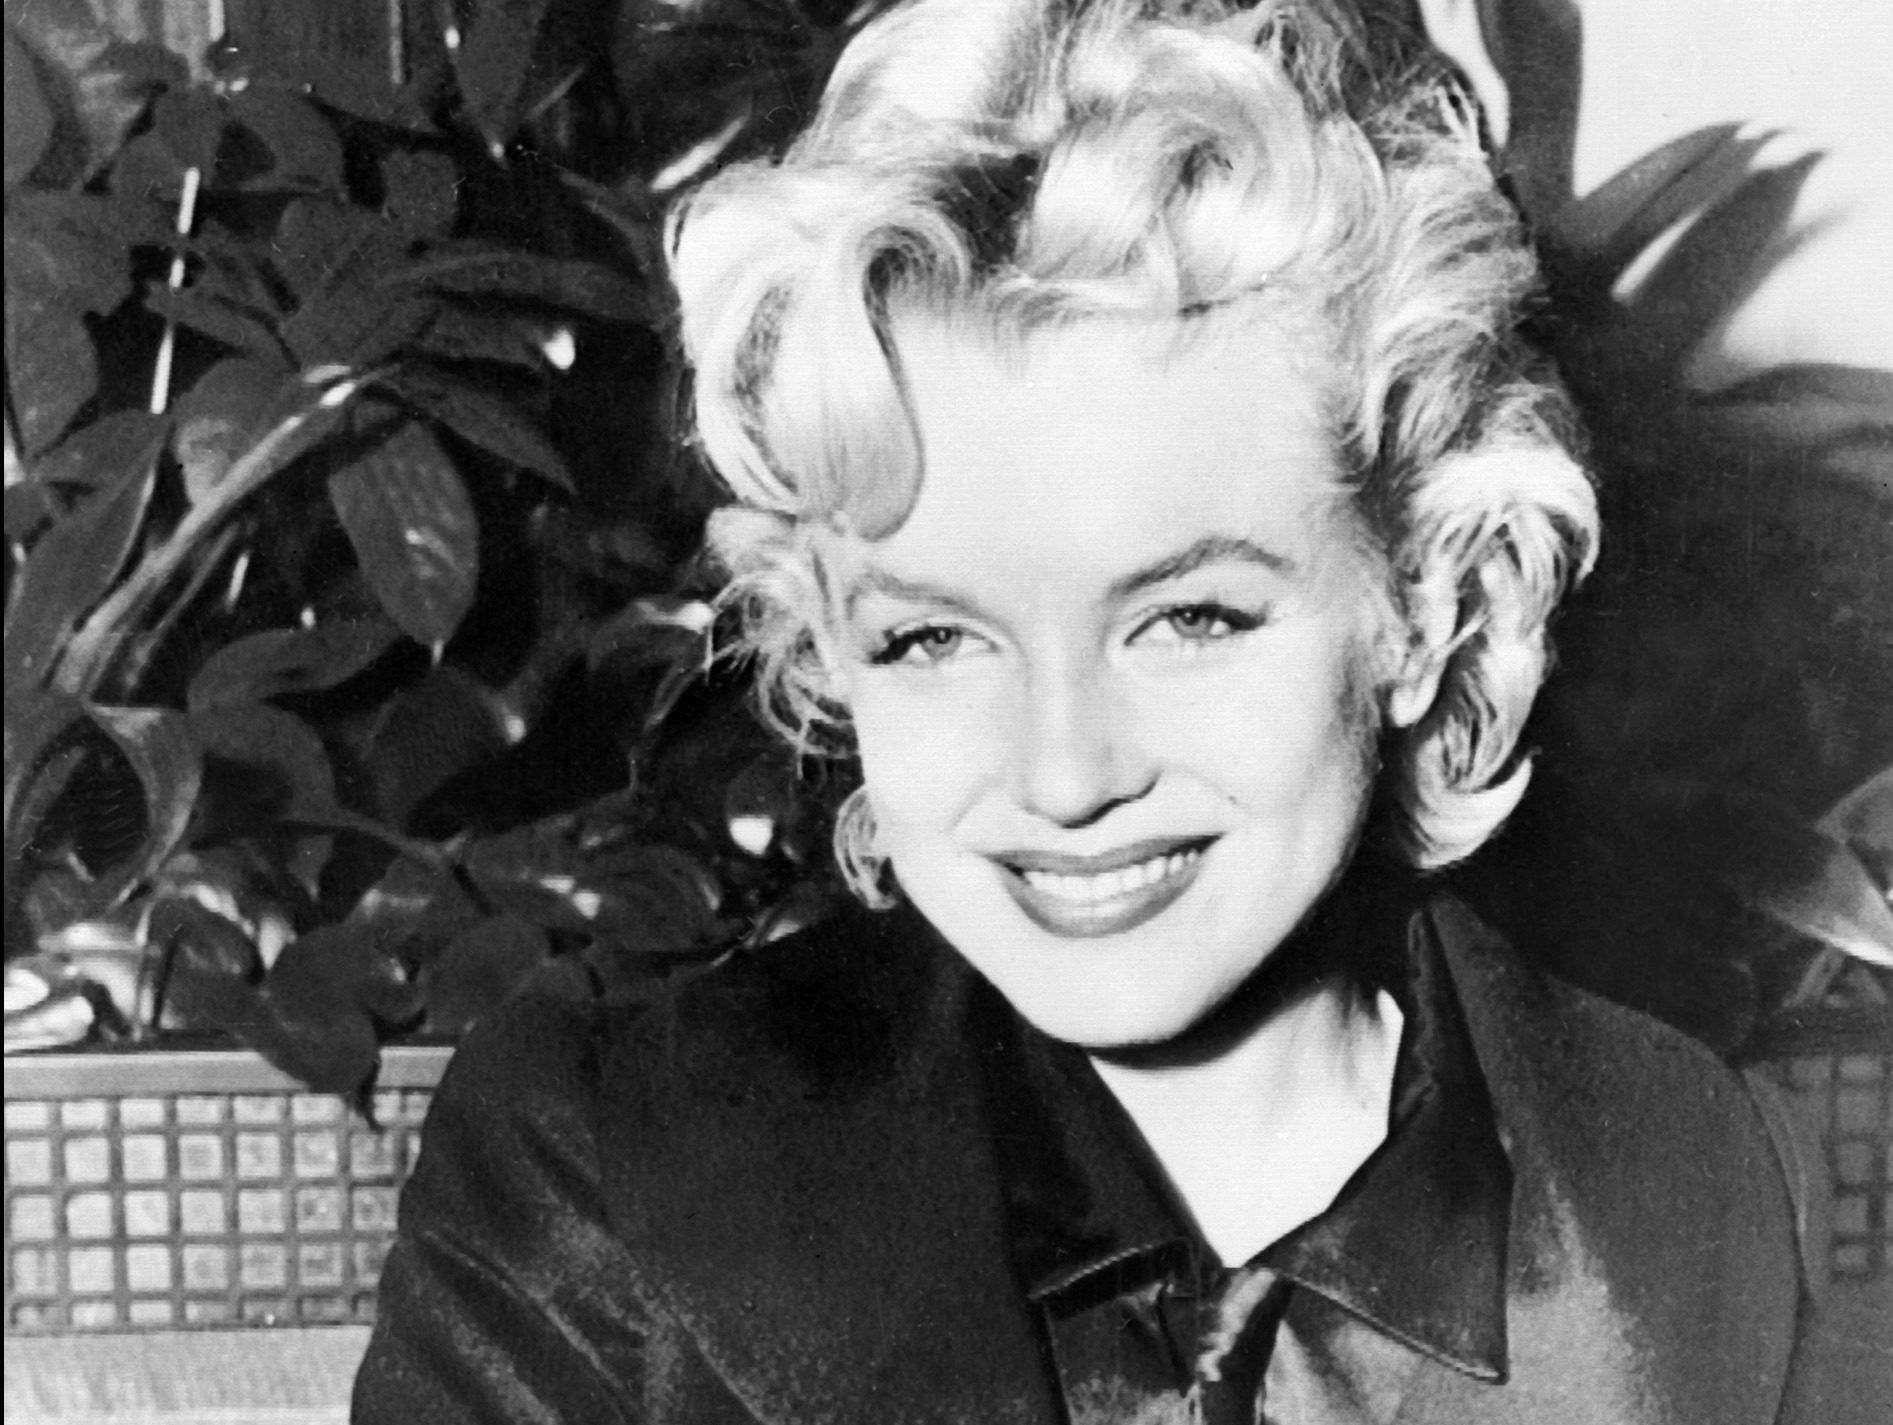 Marilyn Monroe's organs, tissue samples 'disappeared' after death, podcast  claims